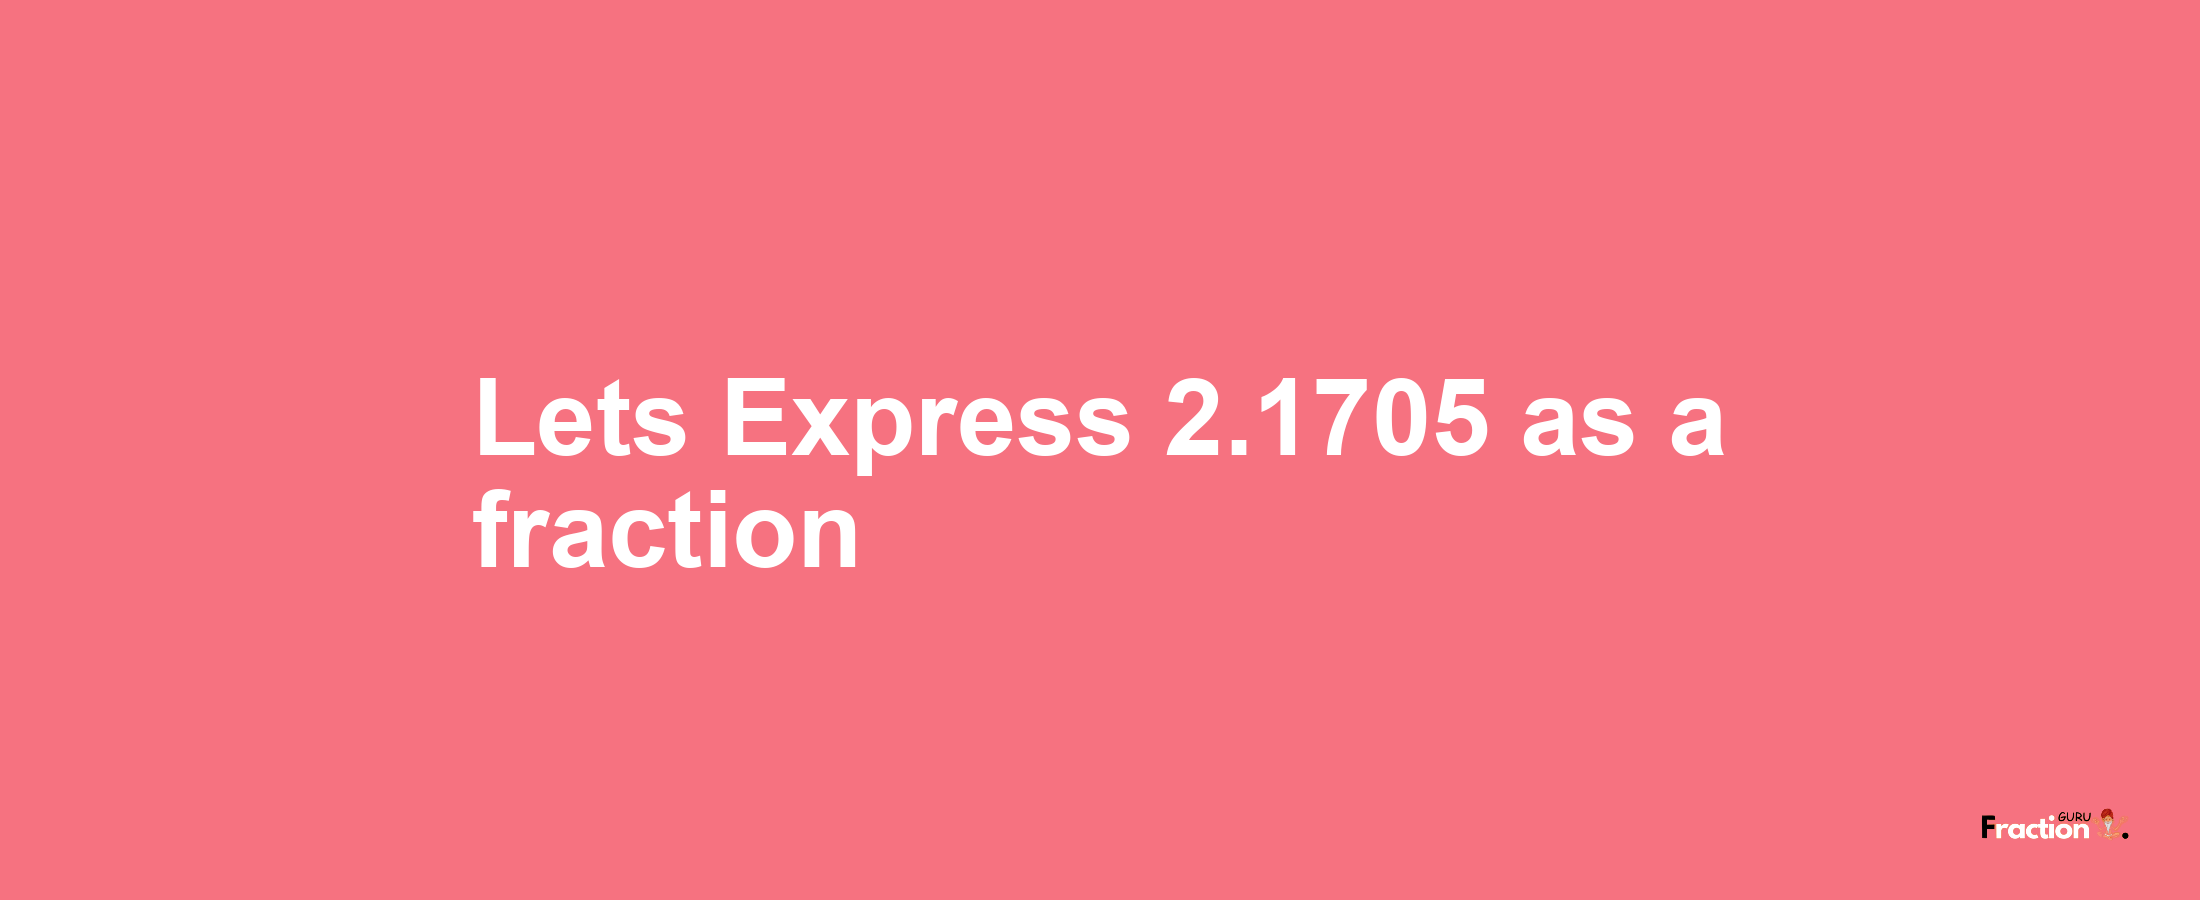 Lets Express 2.1705 as afraction